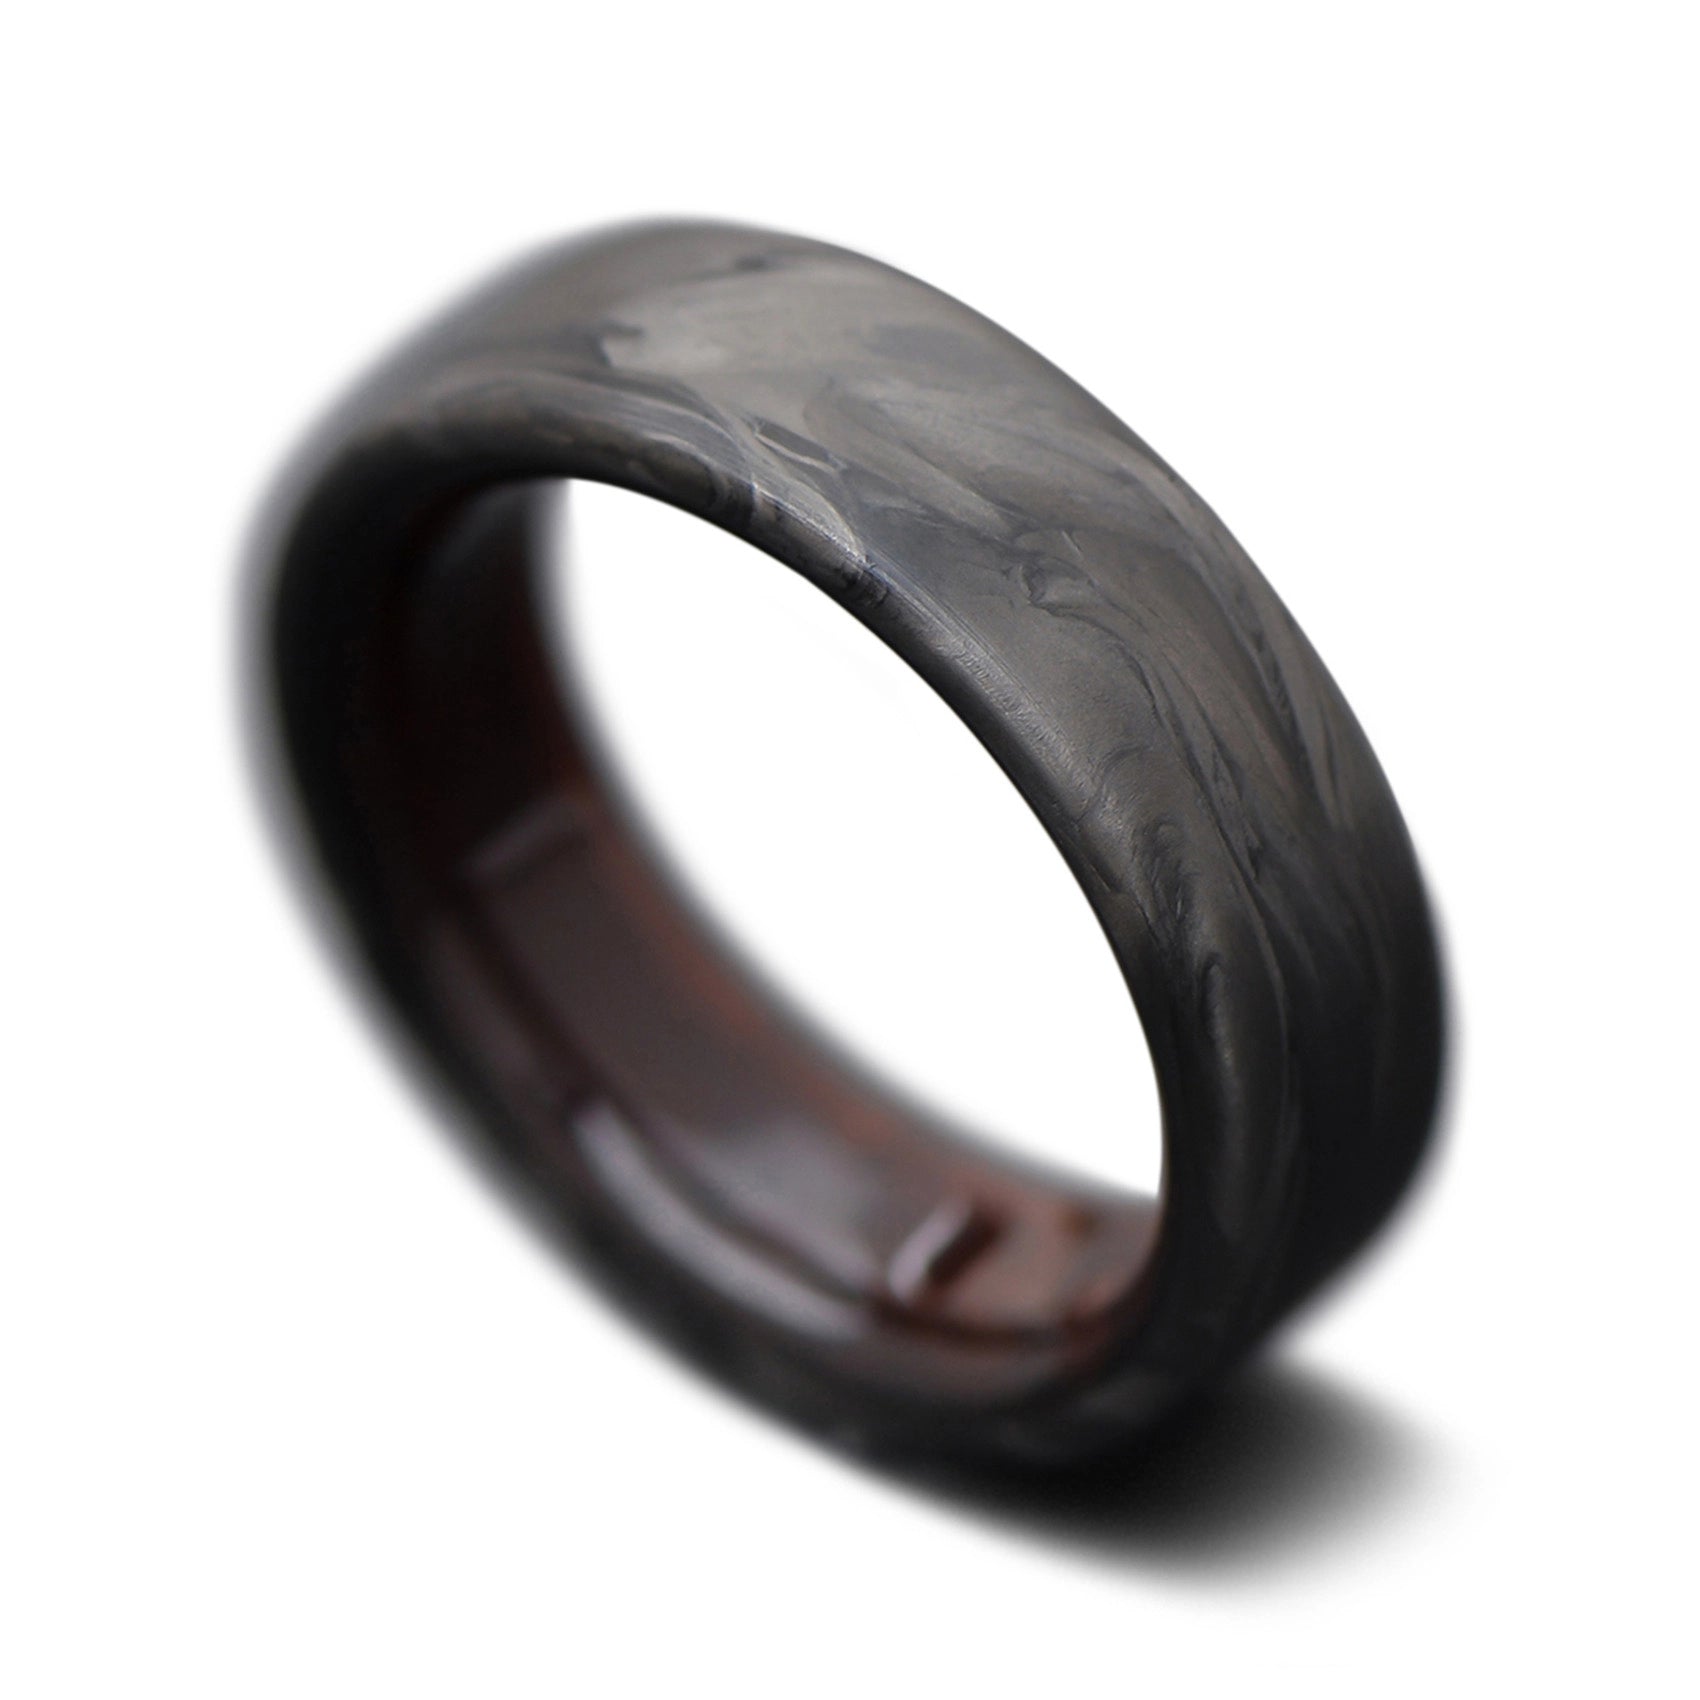 CarbonForged Core Ring with Walnut inner sleeve, 8mm -THE QUEST